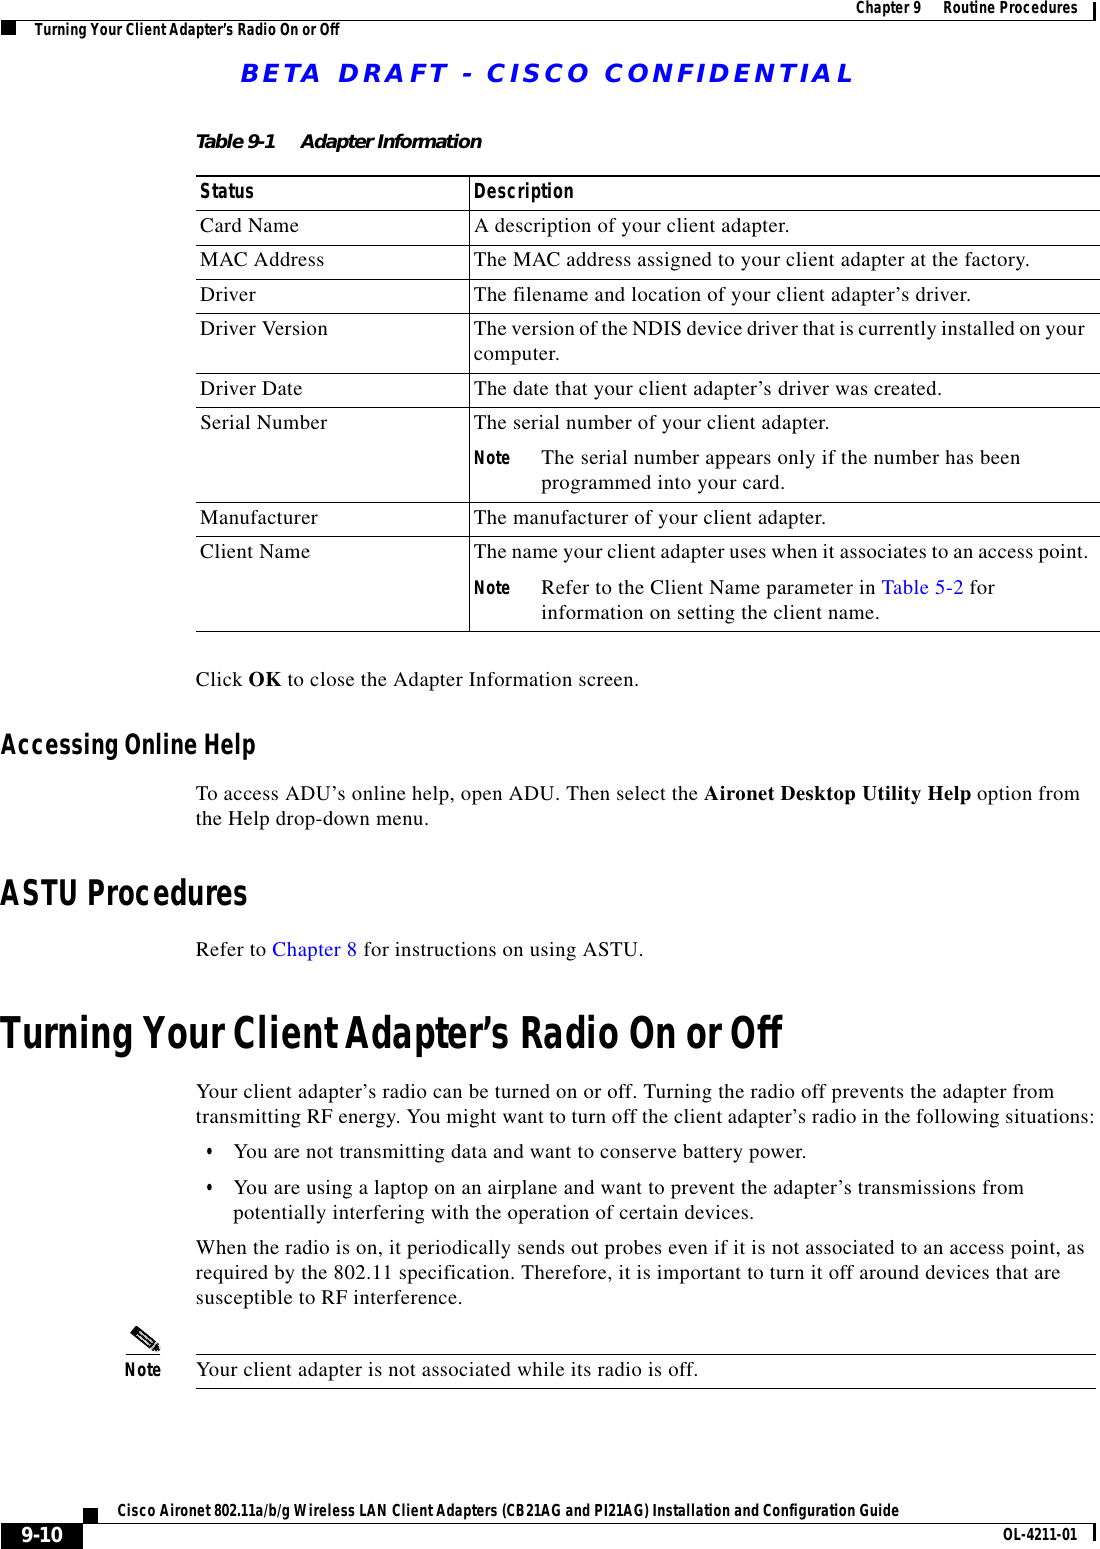 BETA DRAFT - CISCO CONFIDENTIAL9-10Cisco Aironet 802.11a/b/g Wireless LAN Client Adapters (CB21AG and PI21AG) Installation and Configuration Guide OL-4211-01Chapter 9      Routine ProceduresTurning Your Client Adapter’s Radio On or OffClick OK to close the Adapter Information screen.Accessing Online HelpTo access ADU’s online help, open ADU. Then select the Aironet Desktop Utility Help option from the Help drop-down menu.ASTU ProceduresRefer to Chapter 8 for instructions on using ASTU.Turning Your Client Adapter’s Radio On or OffYour client adapter’s radio can be turned on or off. Turning the radio off prevents the adapter from transmitting RF energy. You might want to turn off the client adapter’s radio in the following situations:•You are not transmitting data and want to conserve battery power.•You are using a laptop on an airplane and want to prevent the adapter’s transmissions from potentially interfering with the operation of certain devices.When the radio is on, it periodically sends out probes even if it is not associated to an access point, as required by the 802.11 specification. Therefore, it is important to turn it off around devices that are susceptible to RF interference.Note Your client adapter is not associated while its radio is off.Table 9-1 Adapter InformationStatus DescriptionCard Name A description of your client adapter.MAC Address The MAC address assigned to your client adapter at the factory.Driver The filename and location of your client adapter’s driver.Driver Version The version of the NDIS device driver that is currently installed on your computer.Driver Date The date that your client adapter’s driver was created.Serial Number The serial number of your client adapter.Note The serial number appears only if the number has been programmed into your card.Manufacturer The manufacturer of your client adapter.Client Name The name your client adapter uses when it associates to an access point.Note Refer to the Client Name parameter in Table 5-2 for information on setting the client name.